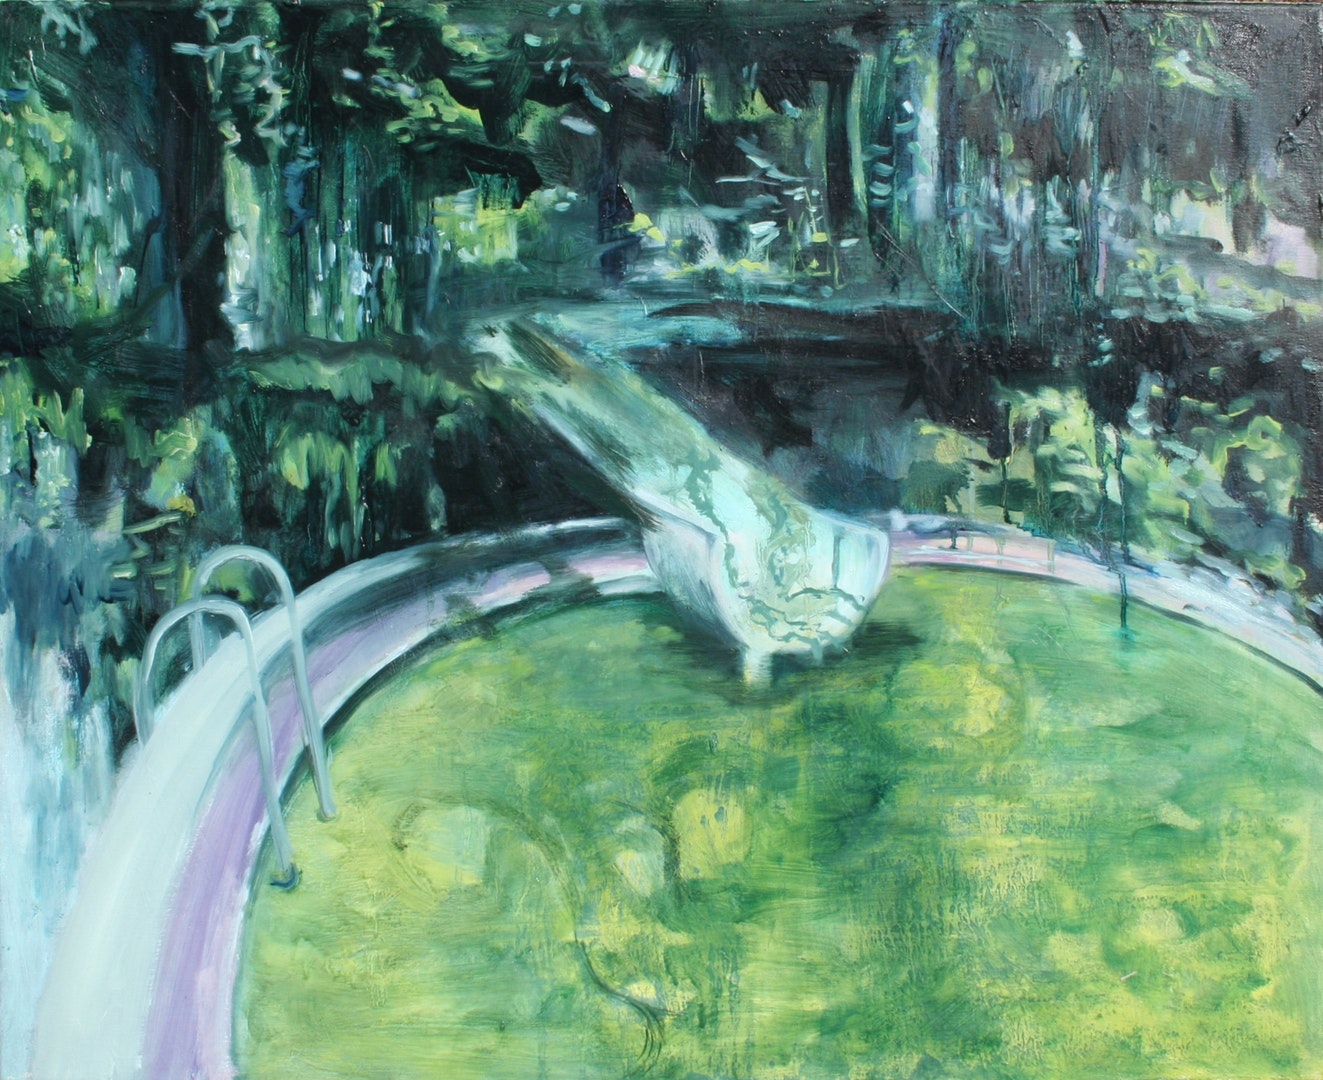 'Jump in the II', Niki Campbell, Oil on canvas, 60 x 60 cm